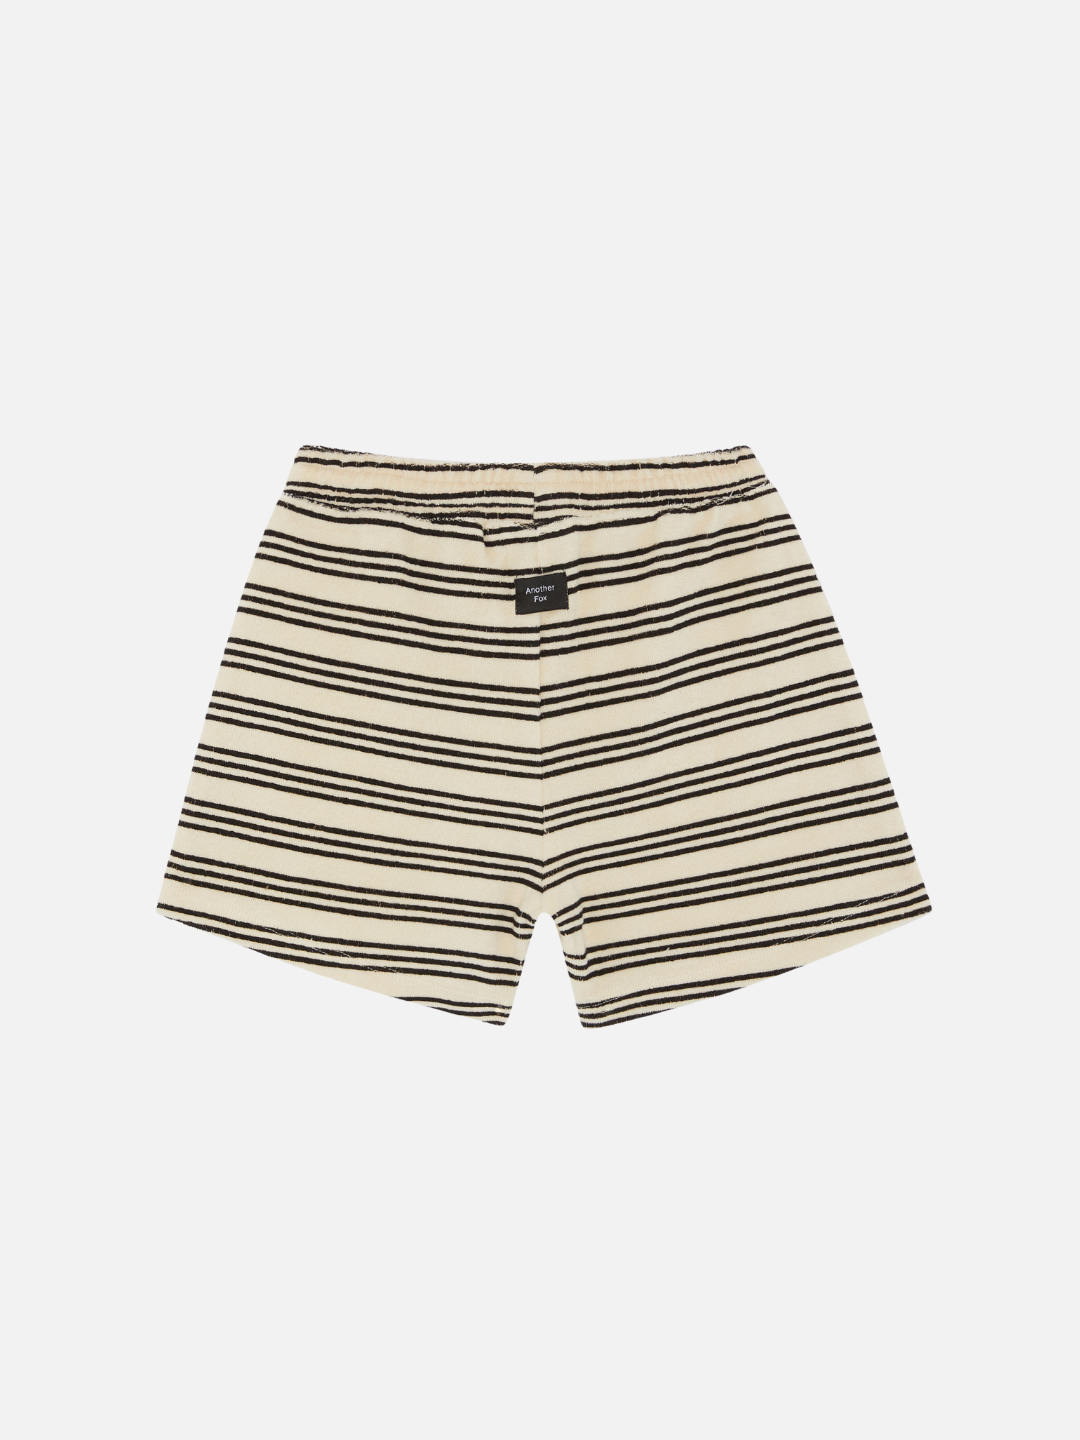 Stripe | A back view of the kid's terry towel shorts in stripe